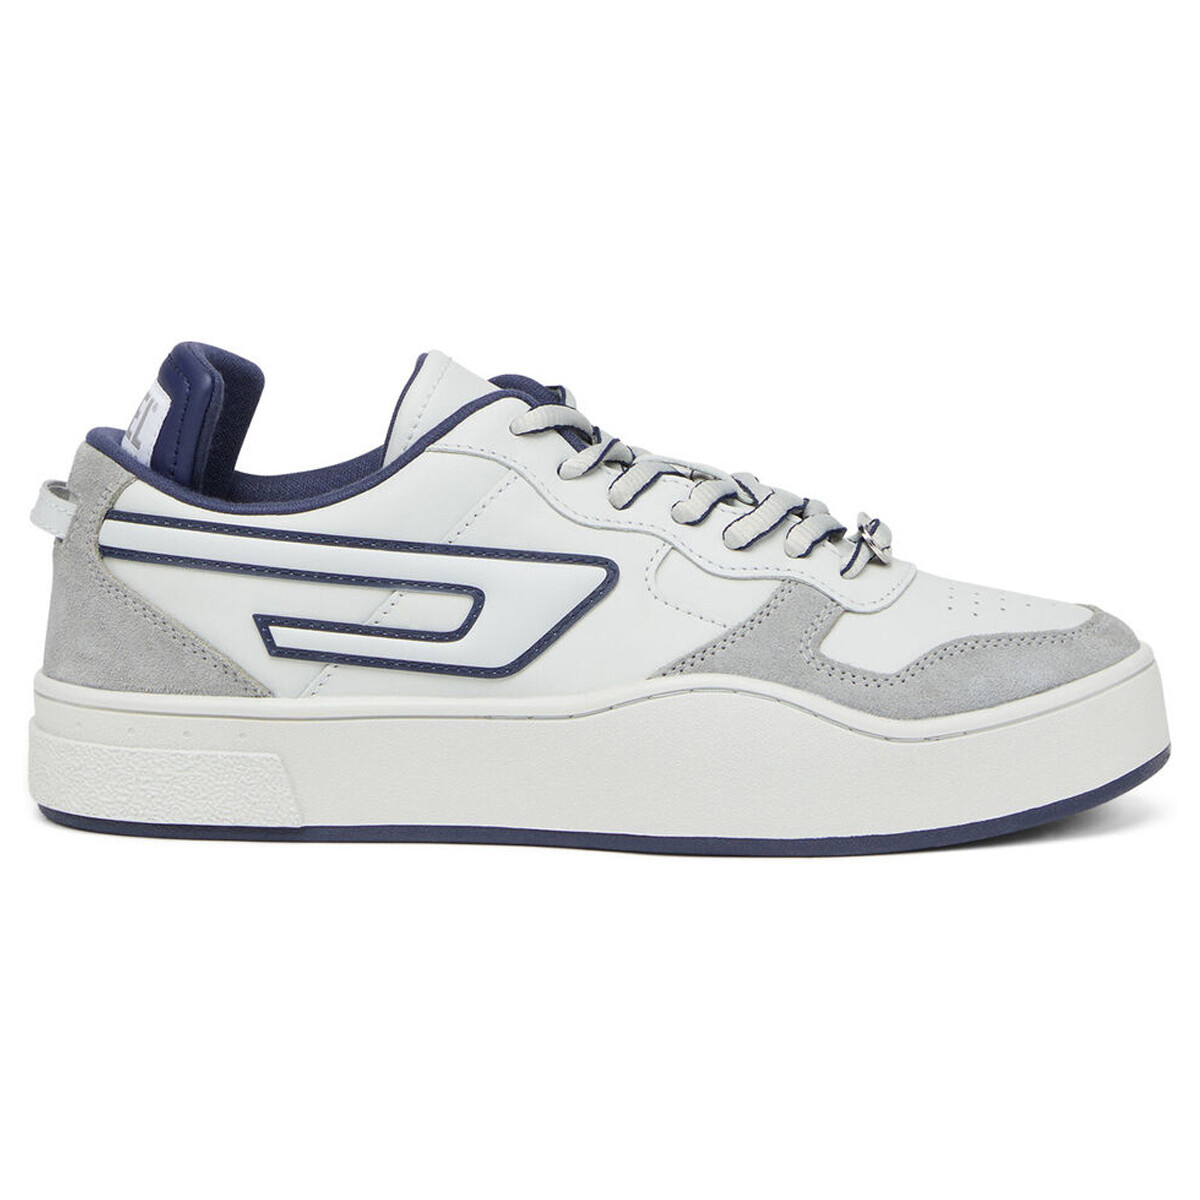 Chaussures Homme Baskets mode Diesel Y03027-PS232-H9461 Gris